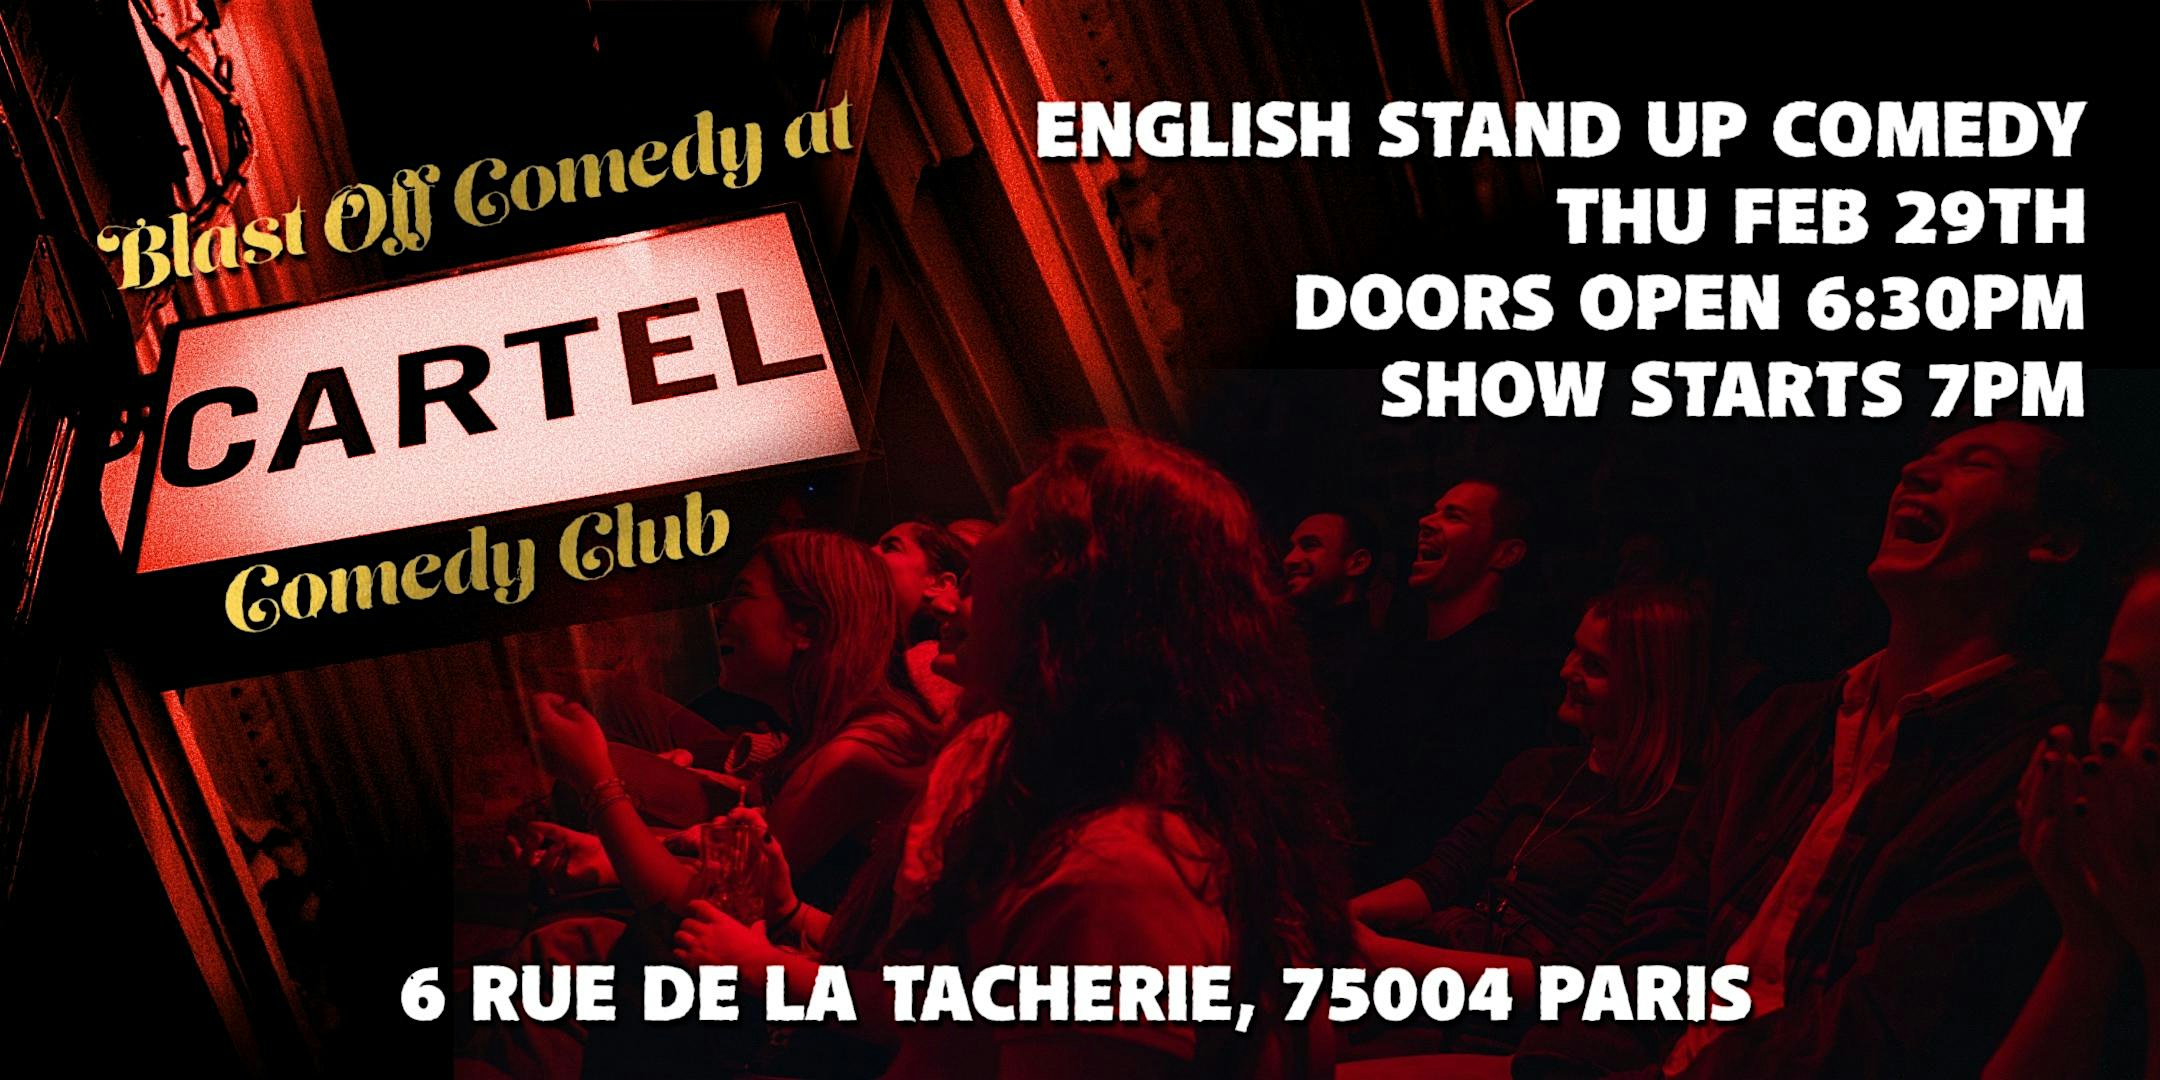 English Stand Up at Cartel Comedy Club ticket image